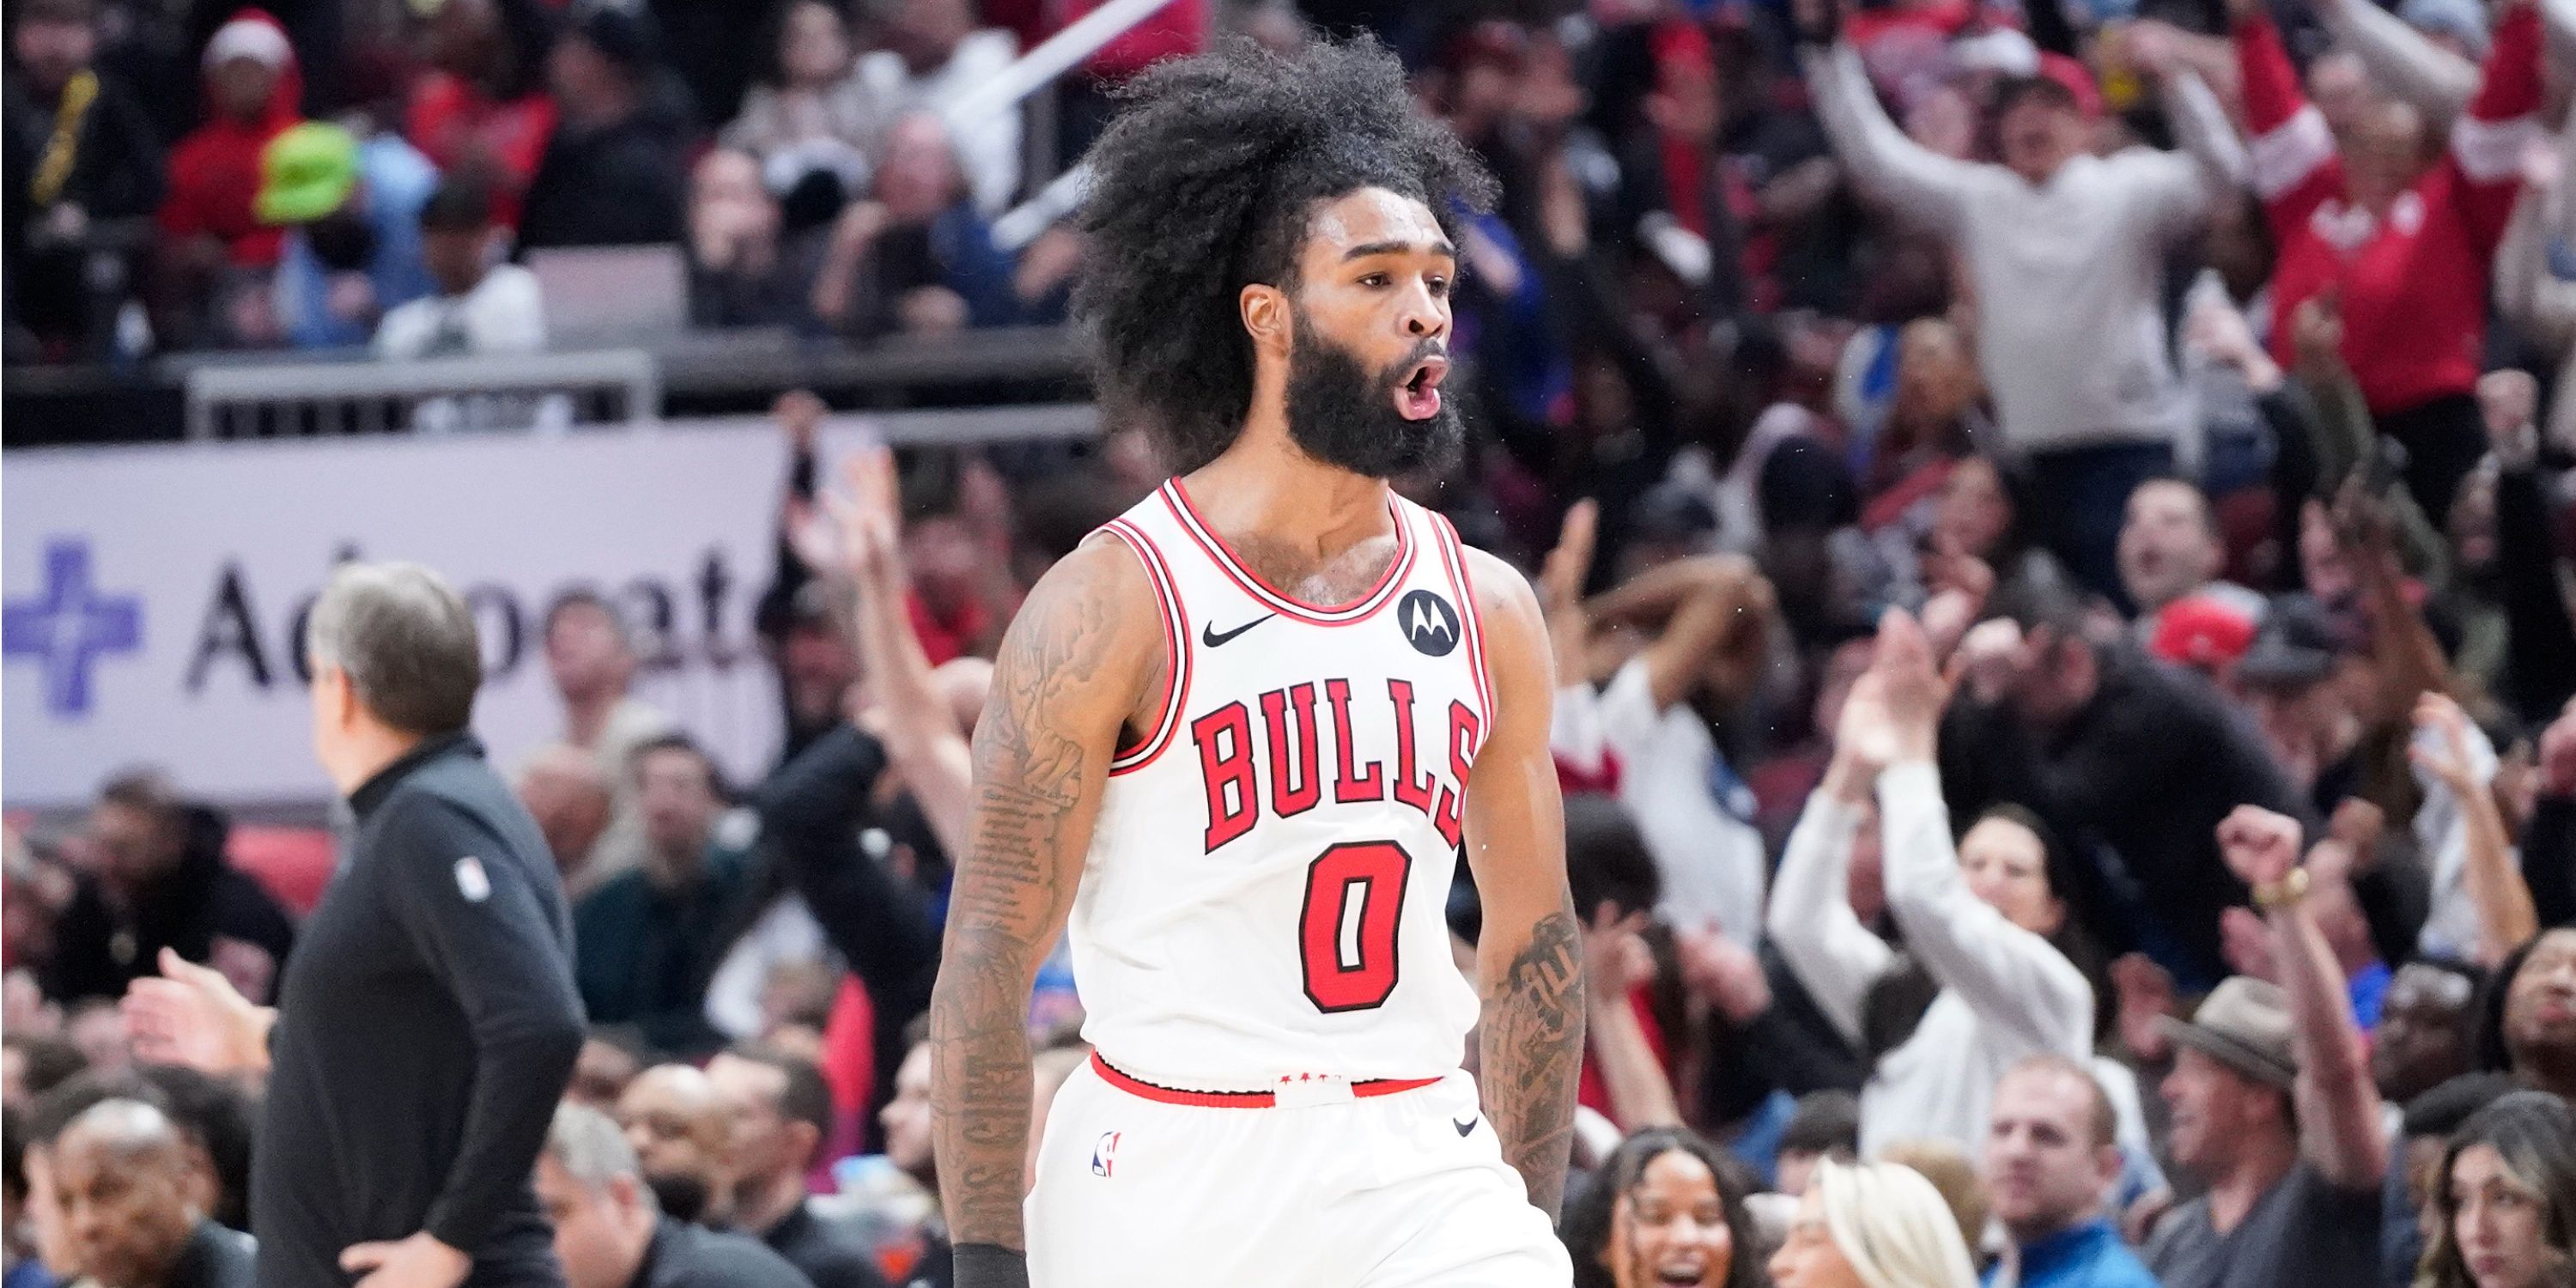 Bulls guard Coby White celebrates in front of crowd